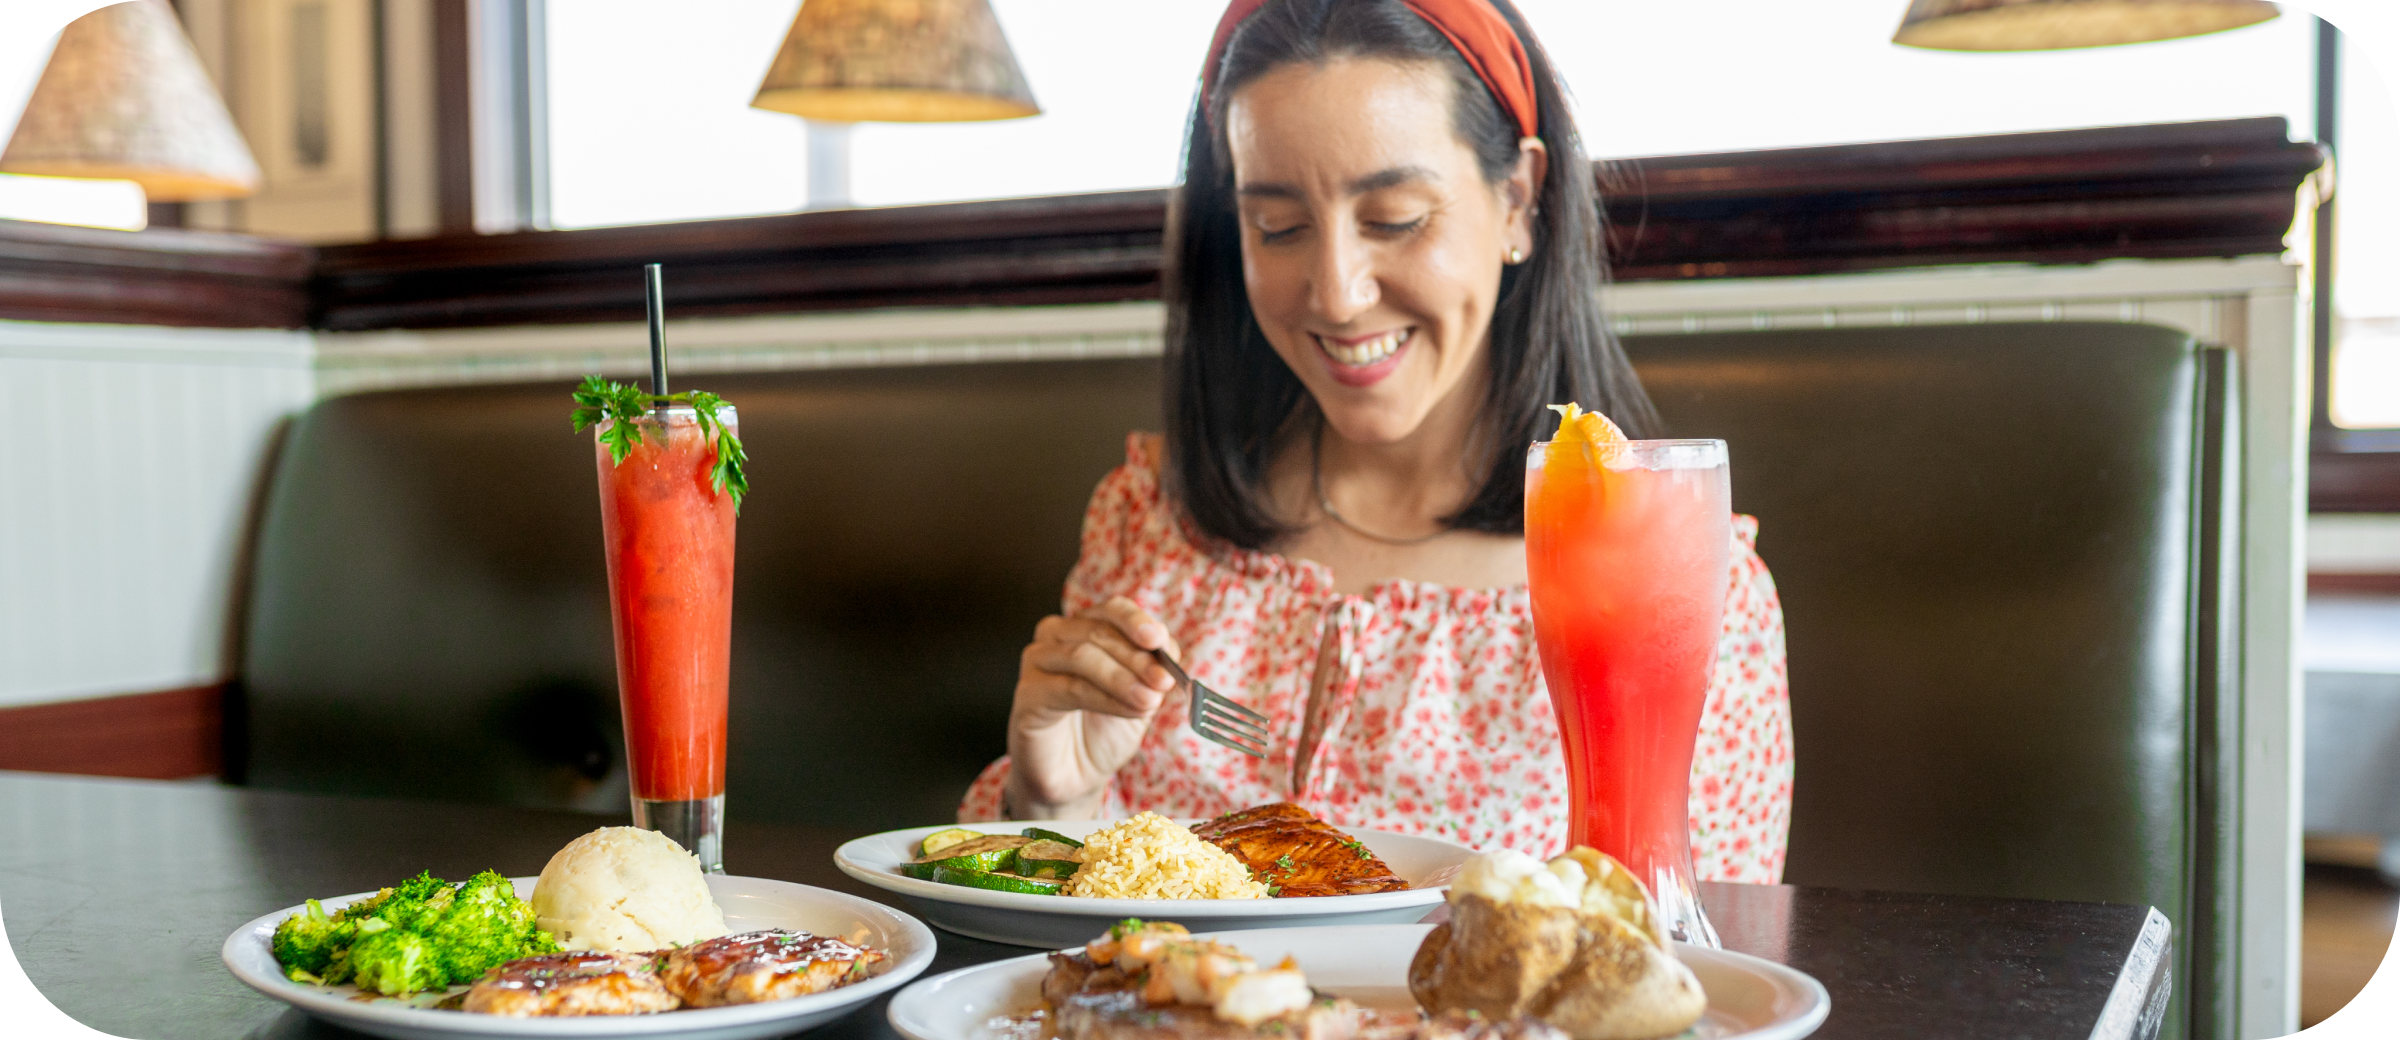 Celebrate Mom with Our Mother’s Day Menu and Specials